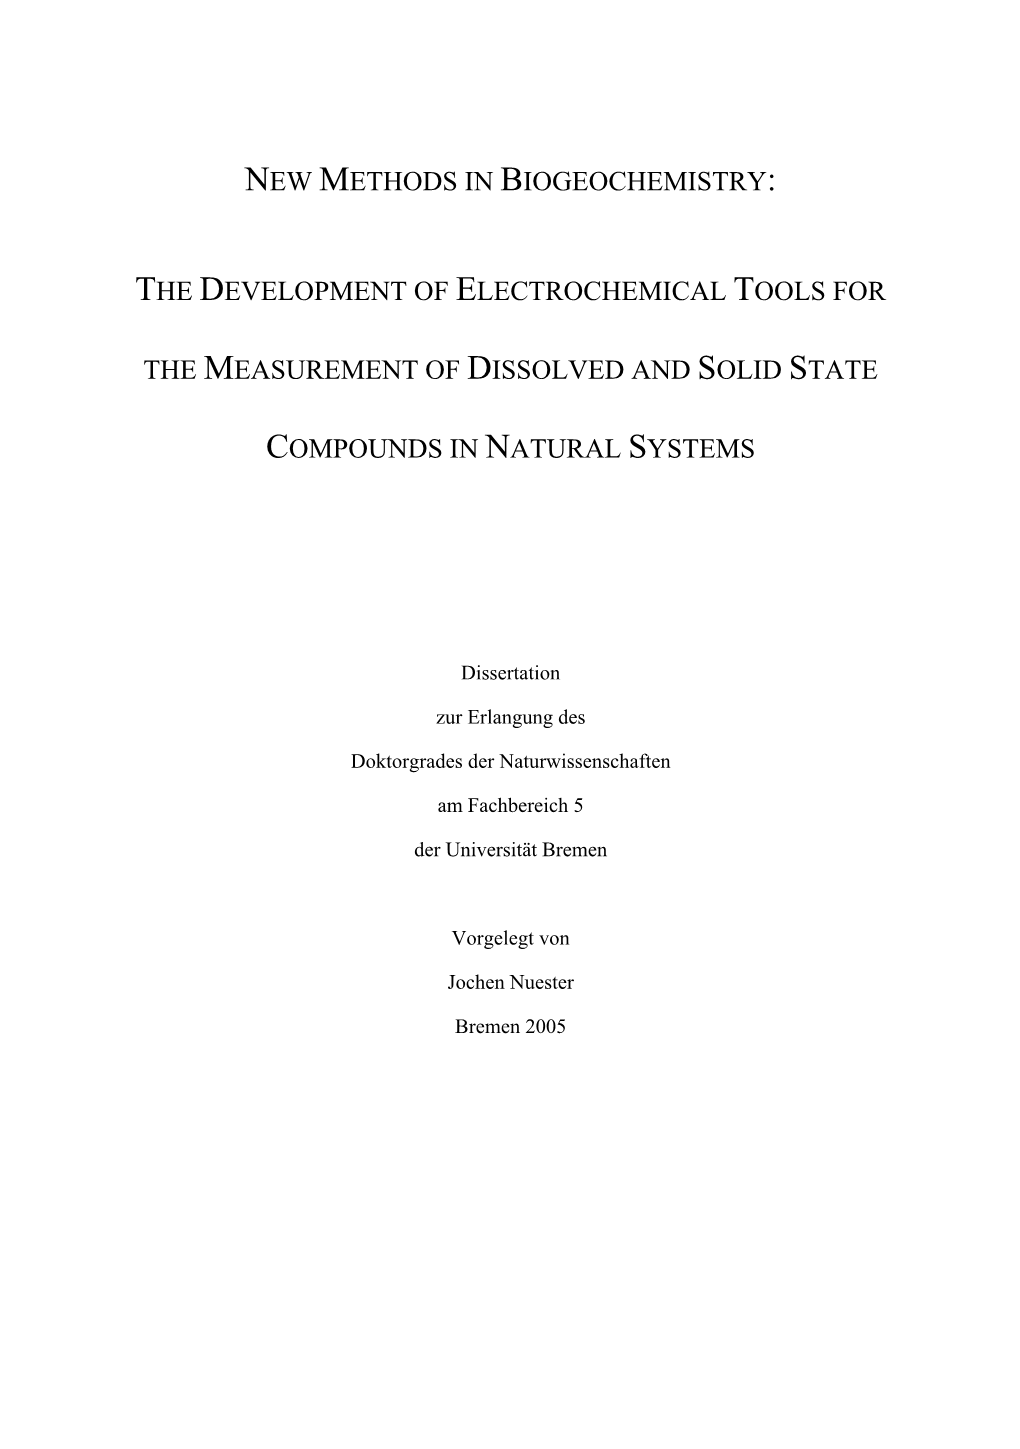 The Development of Electrochemical Tools For